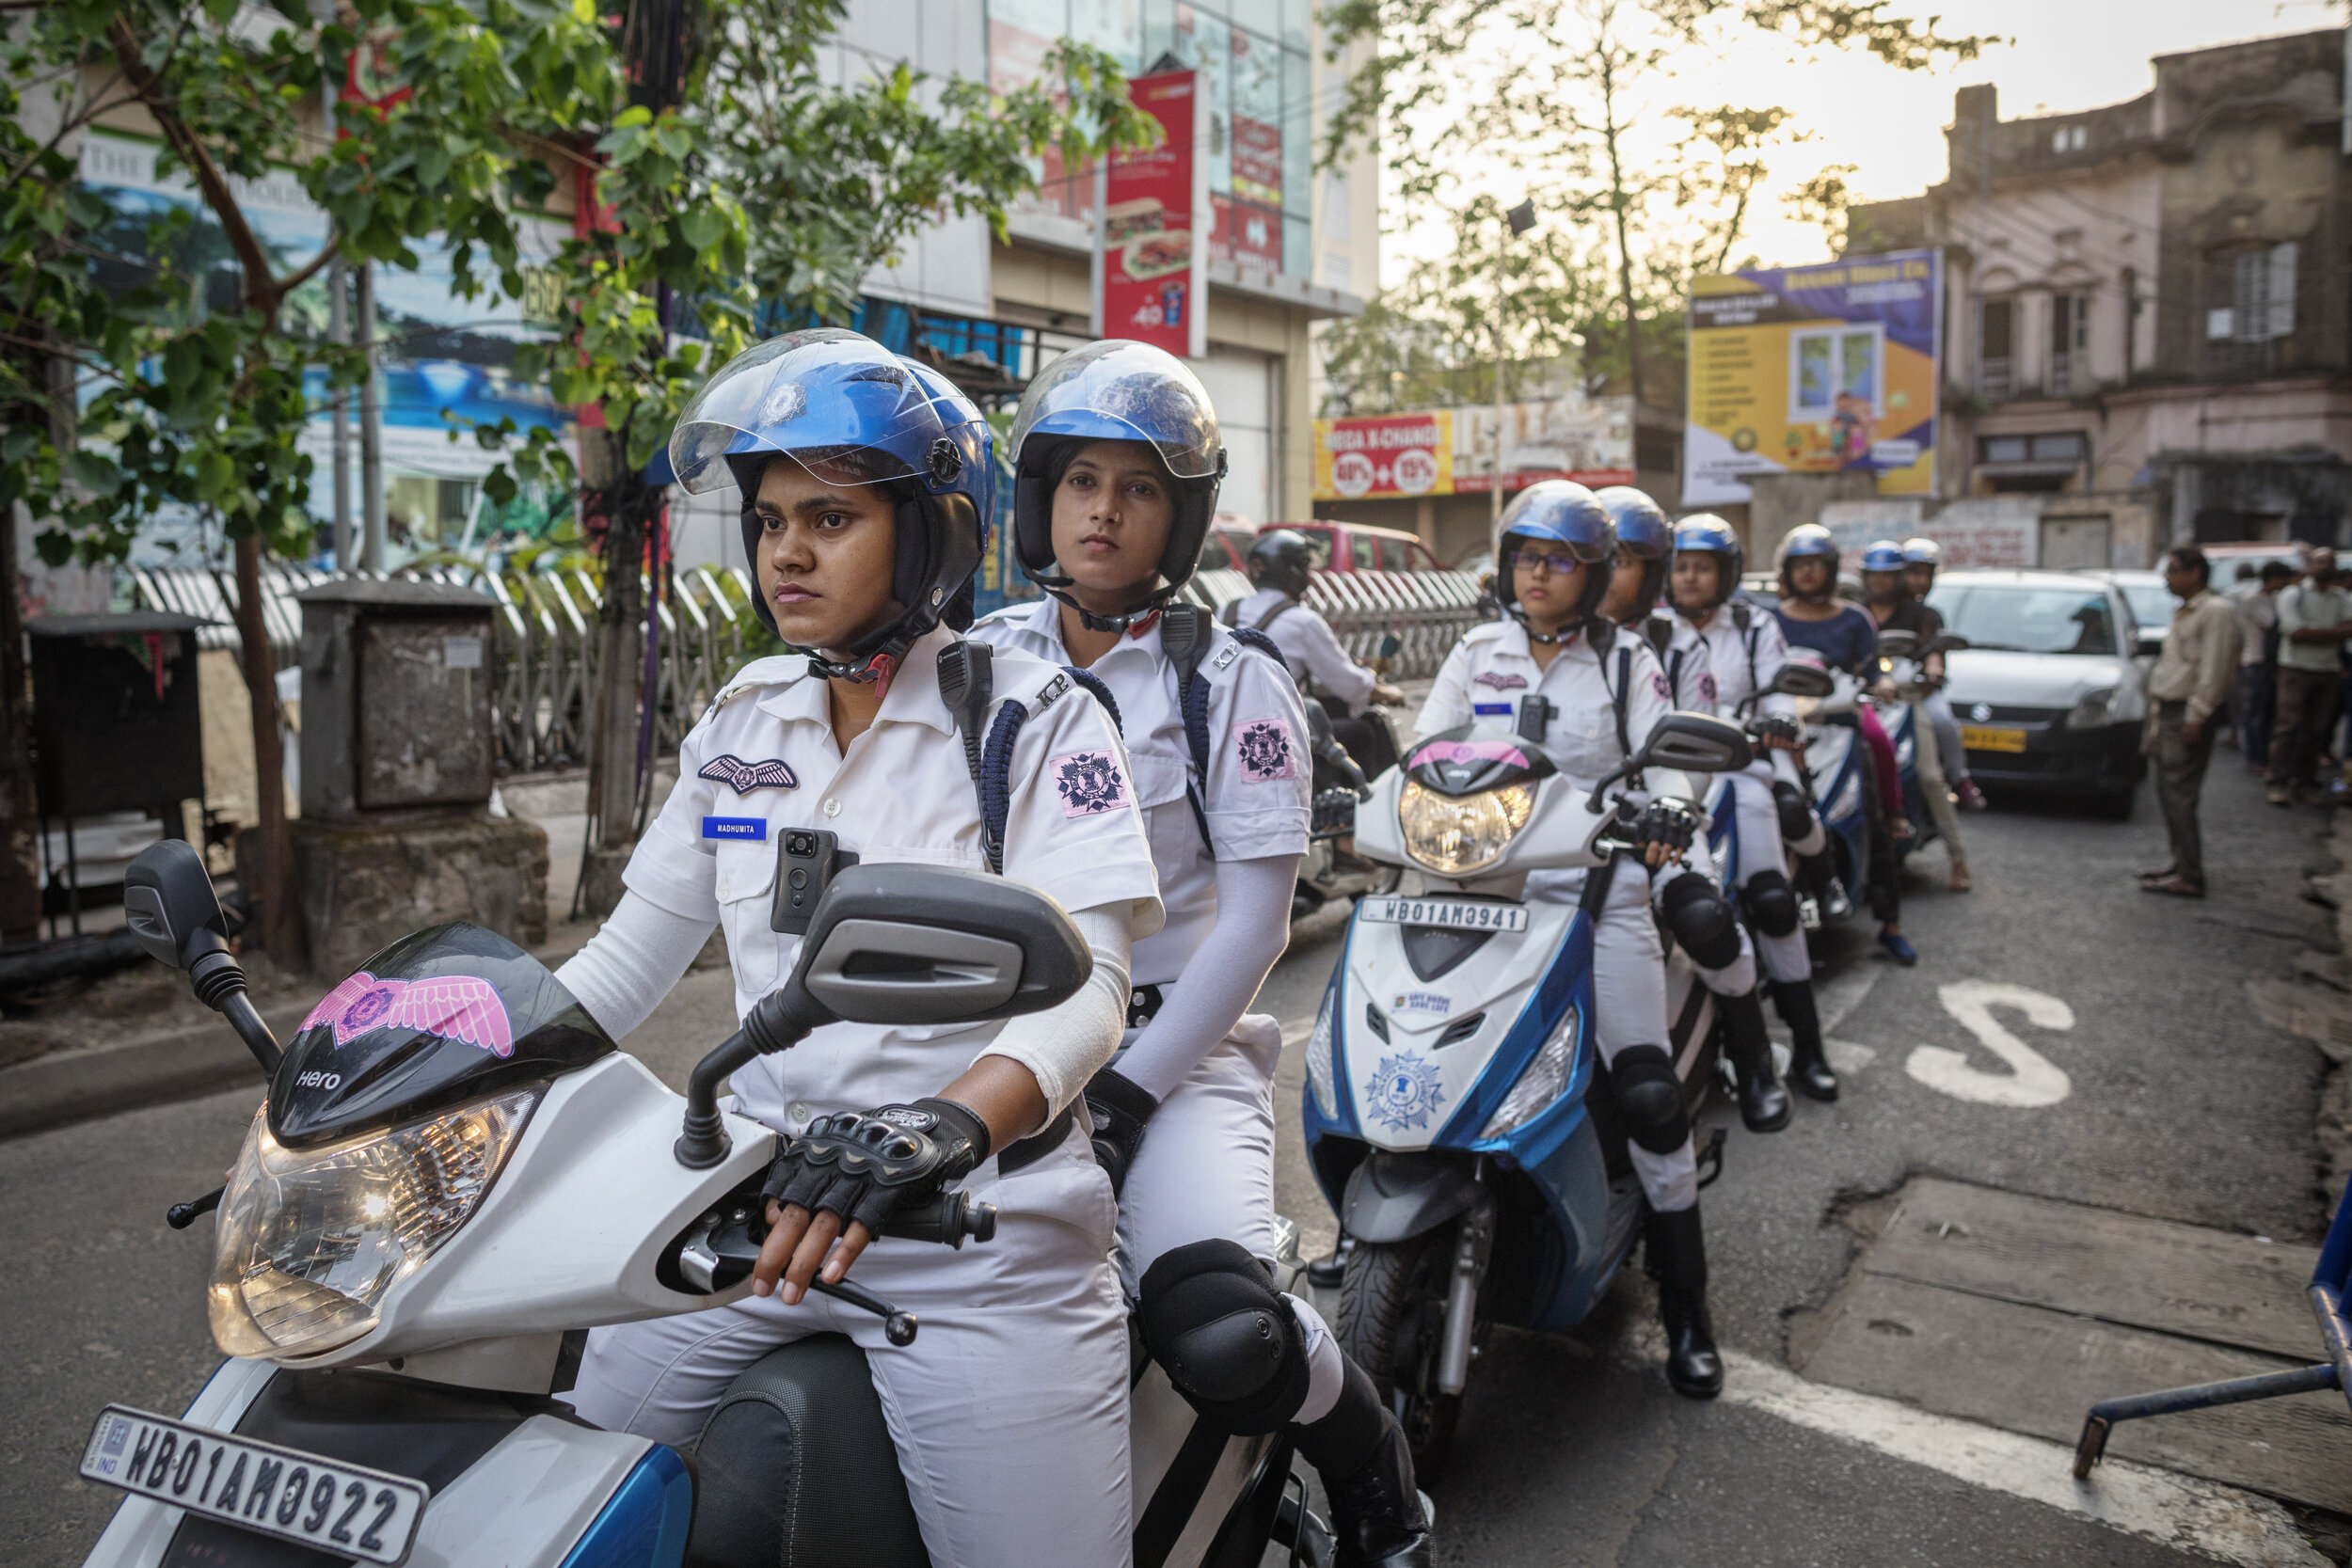  A female task force patrols the streets of Calcutta to secure women's security / India 2019 